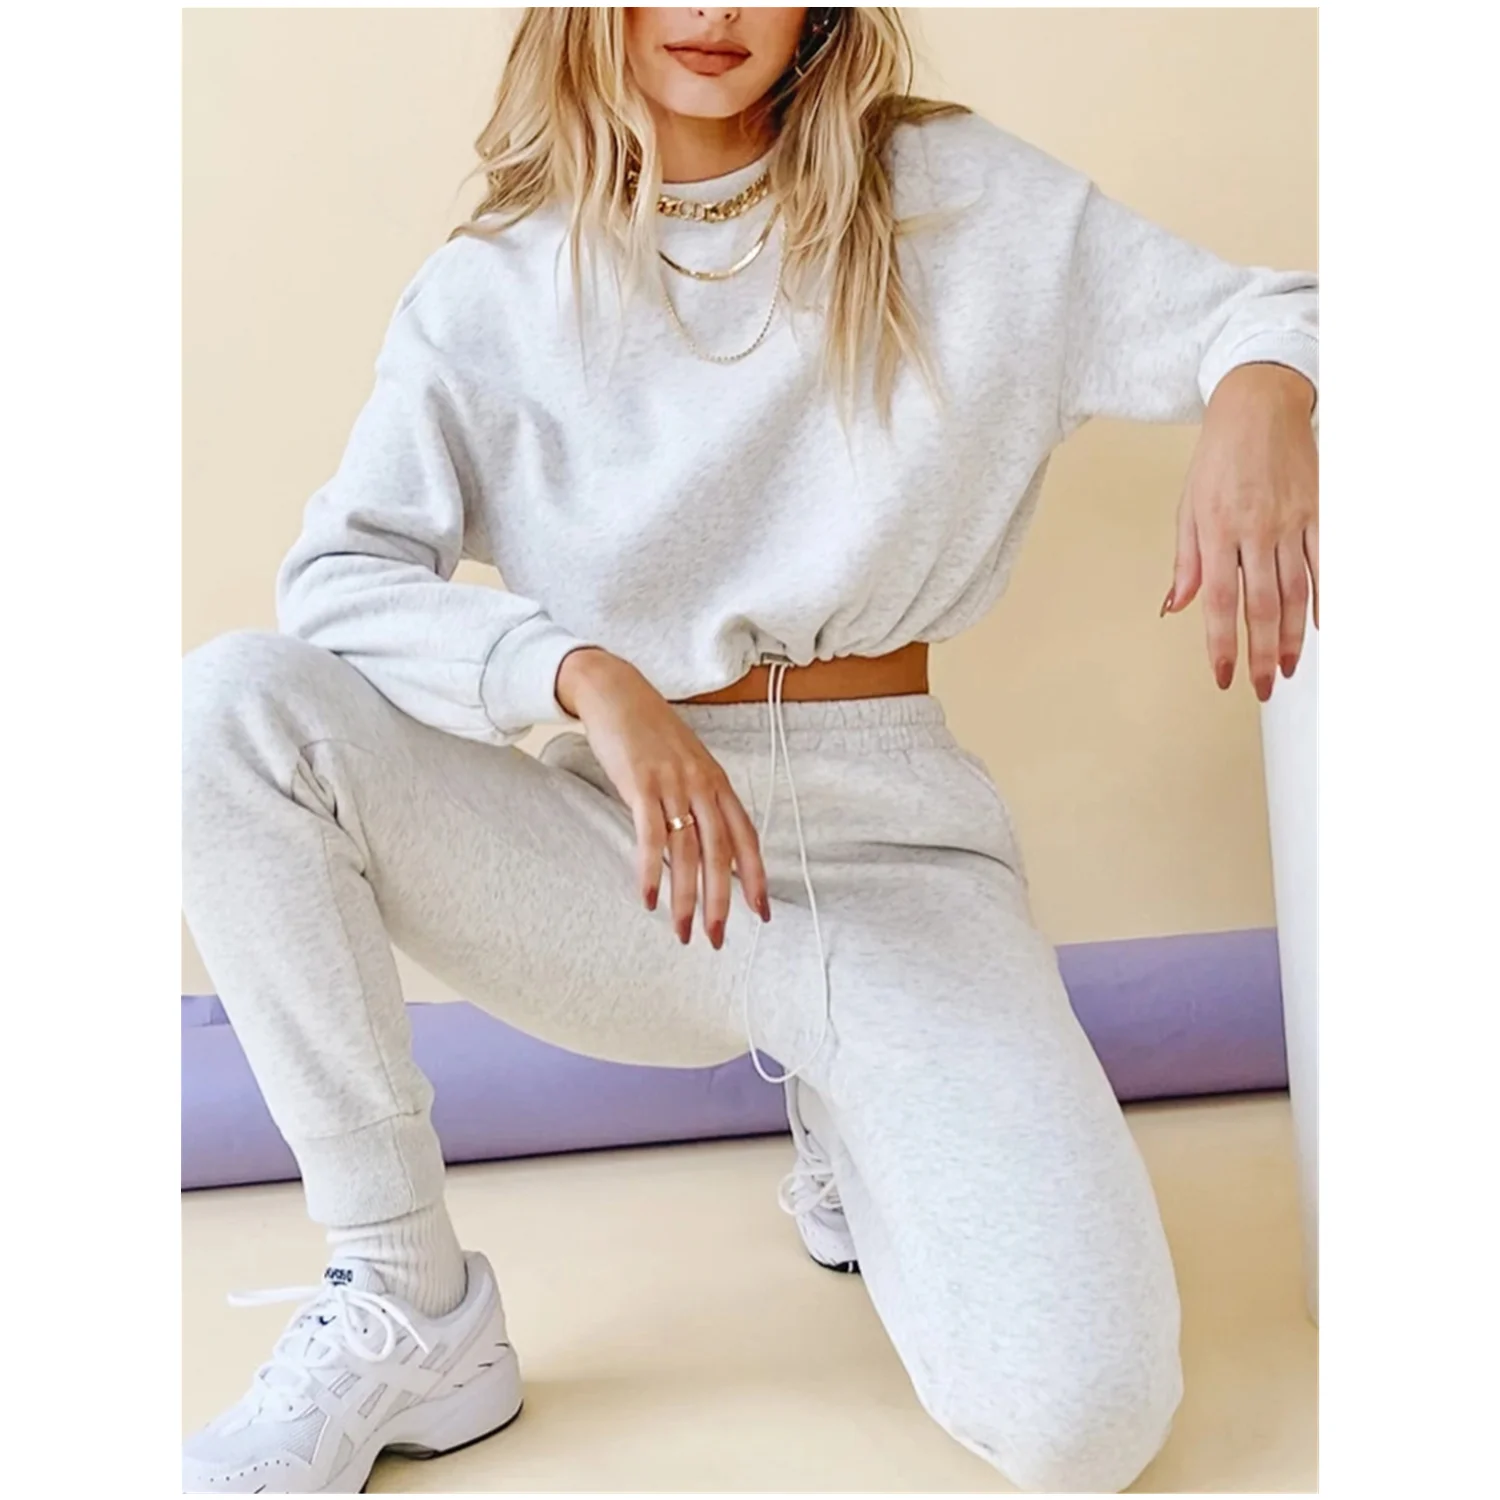 

Two Peice Crop Top Crewneck Sweatsuit Women Adjust Rope Sweatpants Sets Plain Blank Oversized Tracksuits, As picture/customized colors